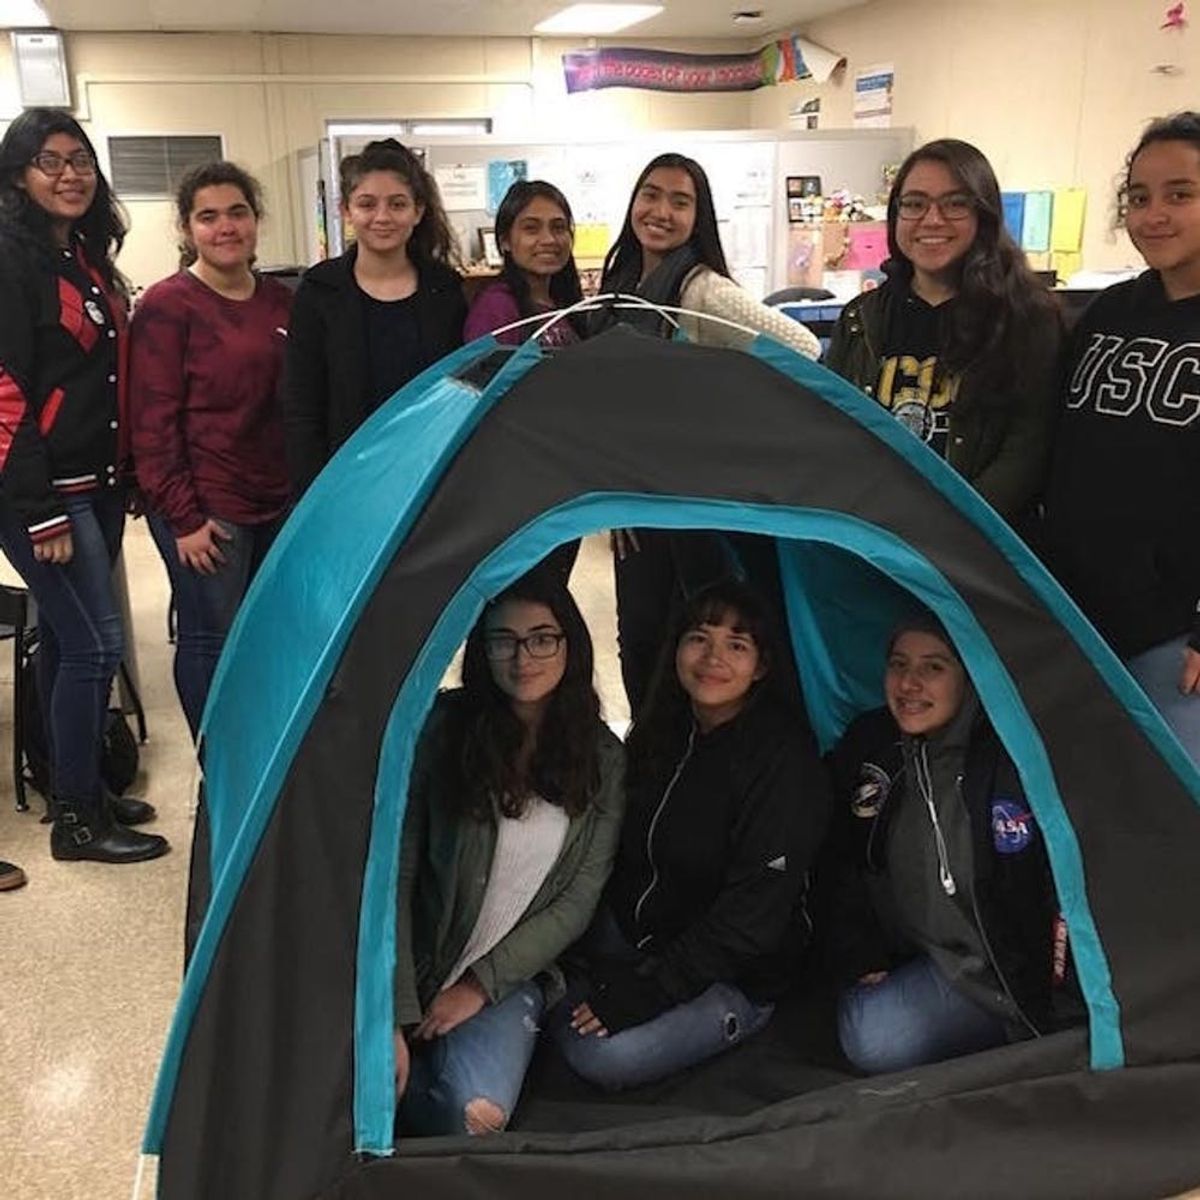 These High Schoolers Who Invented a Solar-Powered Tent for the Homeless Are the Future